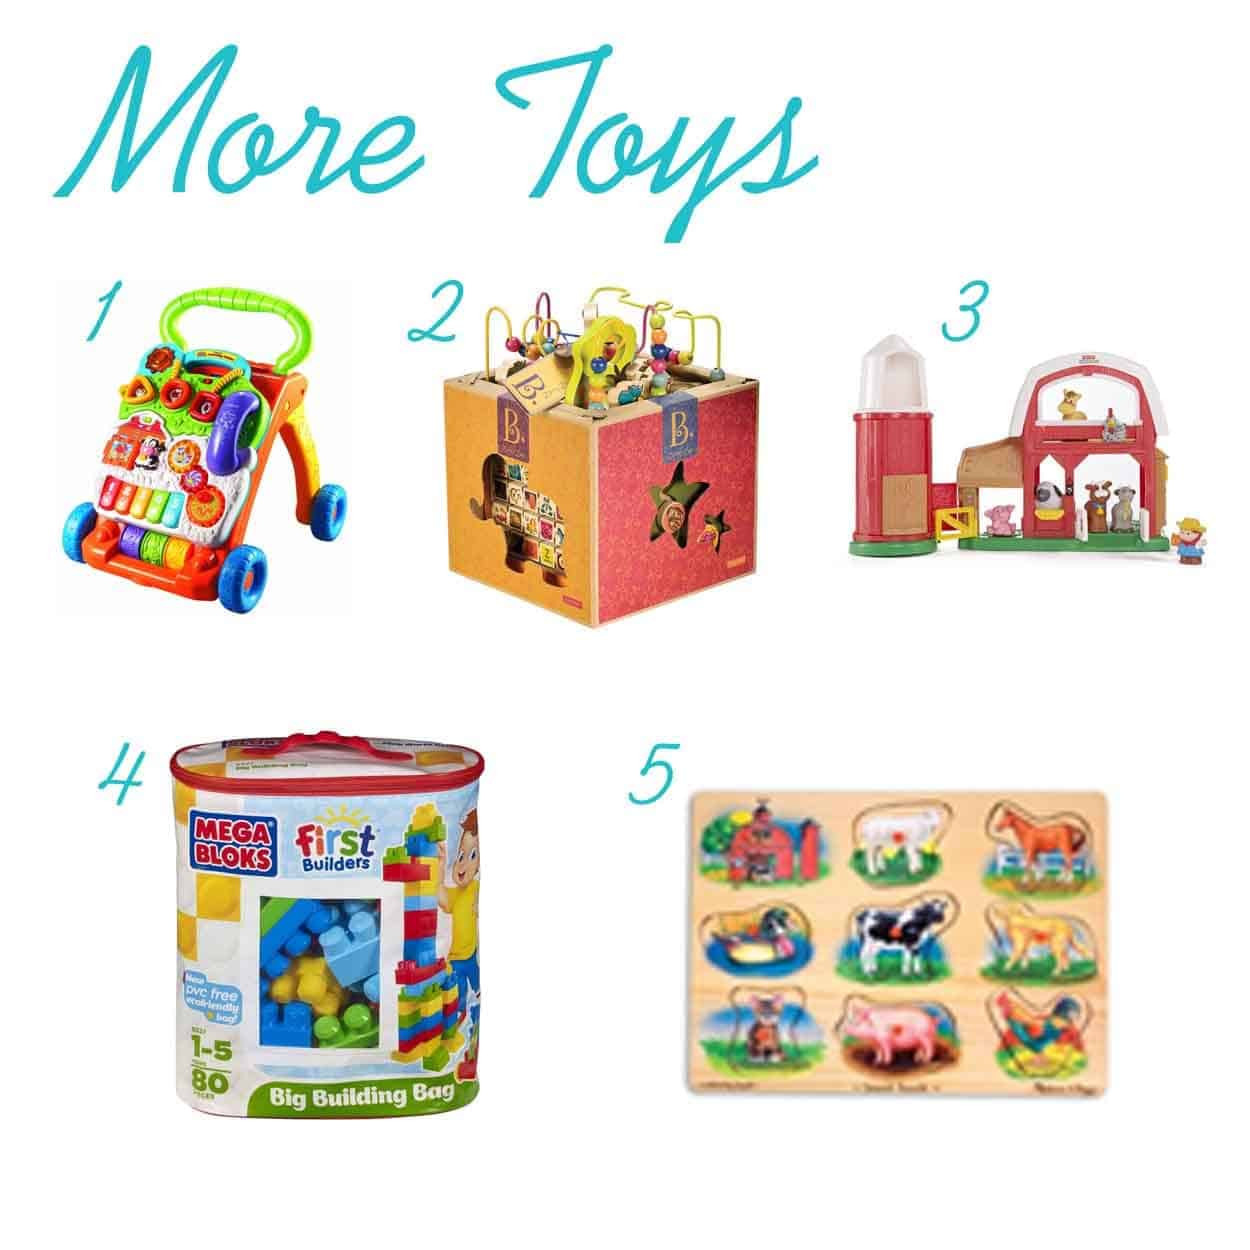 Birthday Gifts For One Year Old Boy
 The Ultimate Gift List for a 1 Year Old Boy • The Pinning